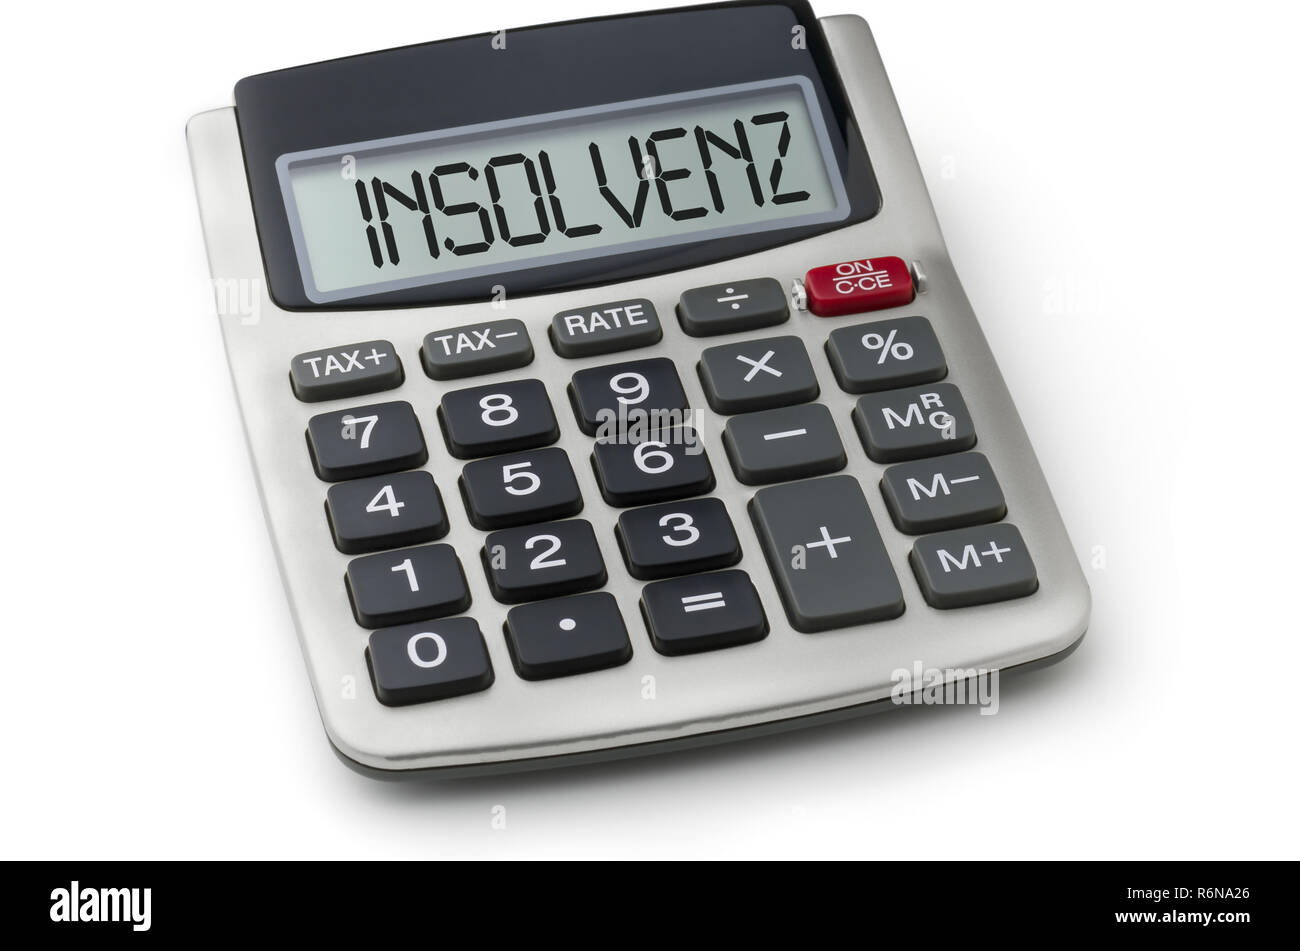 calculator with the word bankruptcy in the display Stock Photo